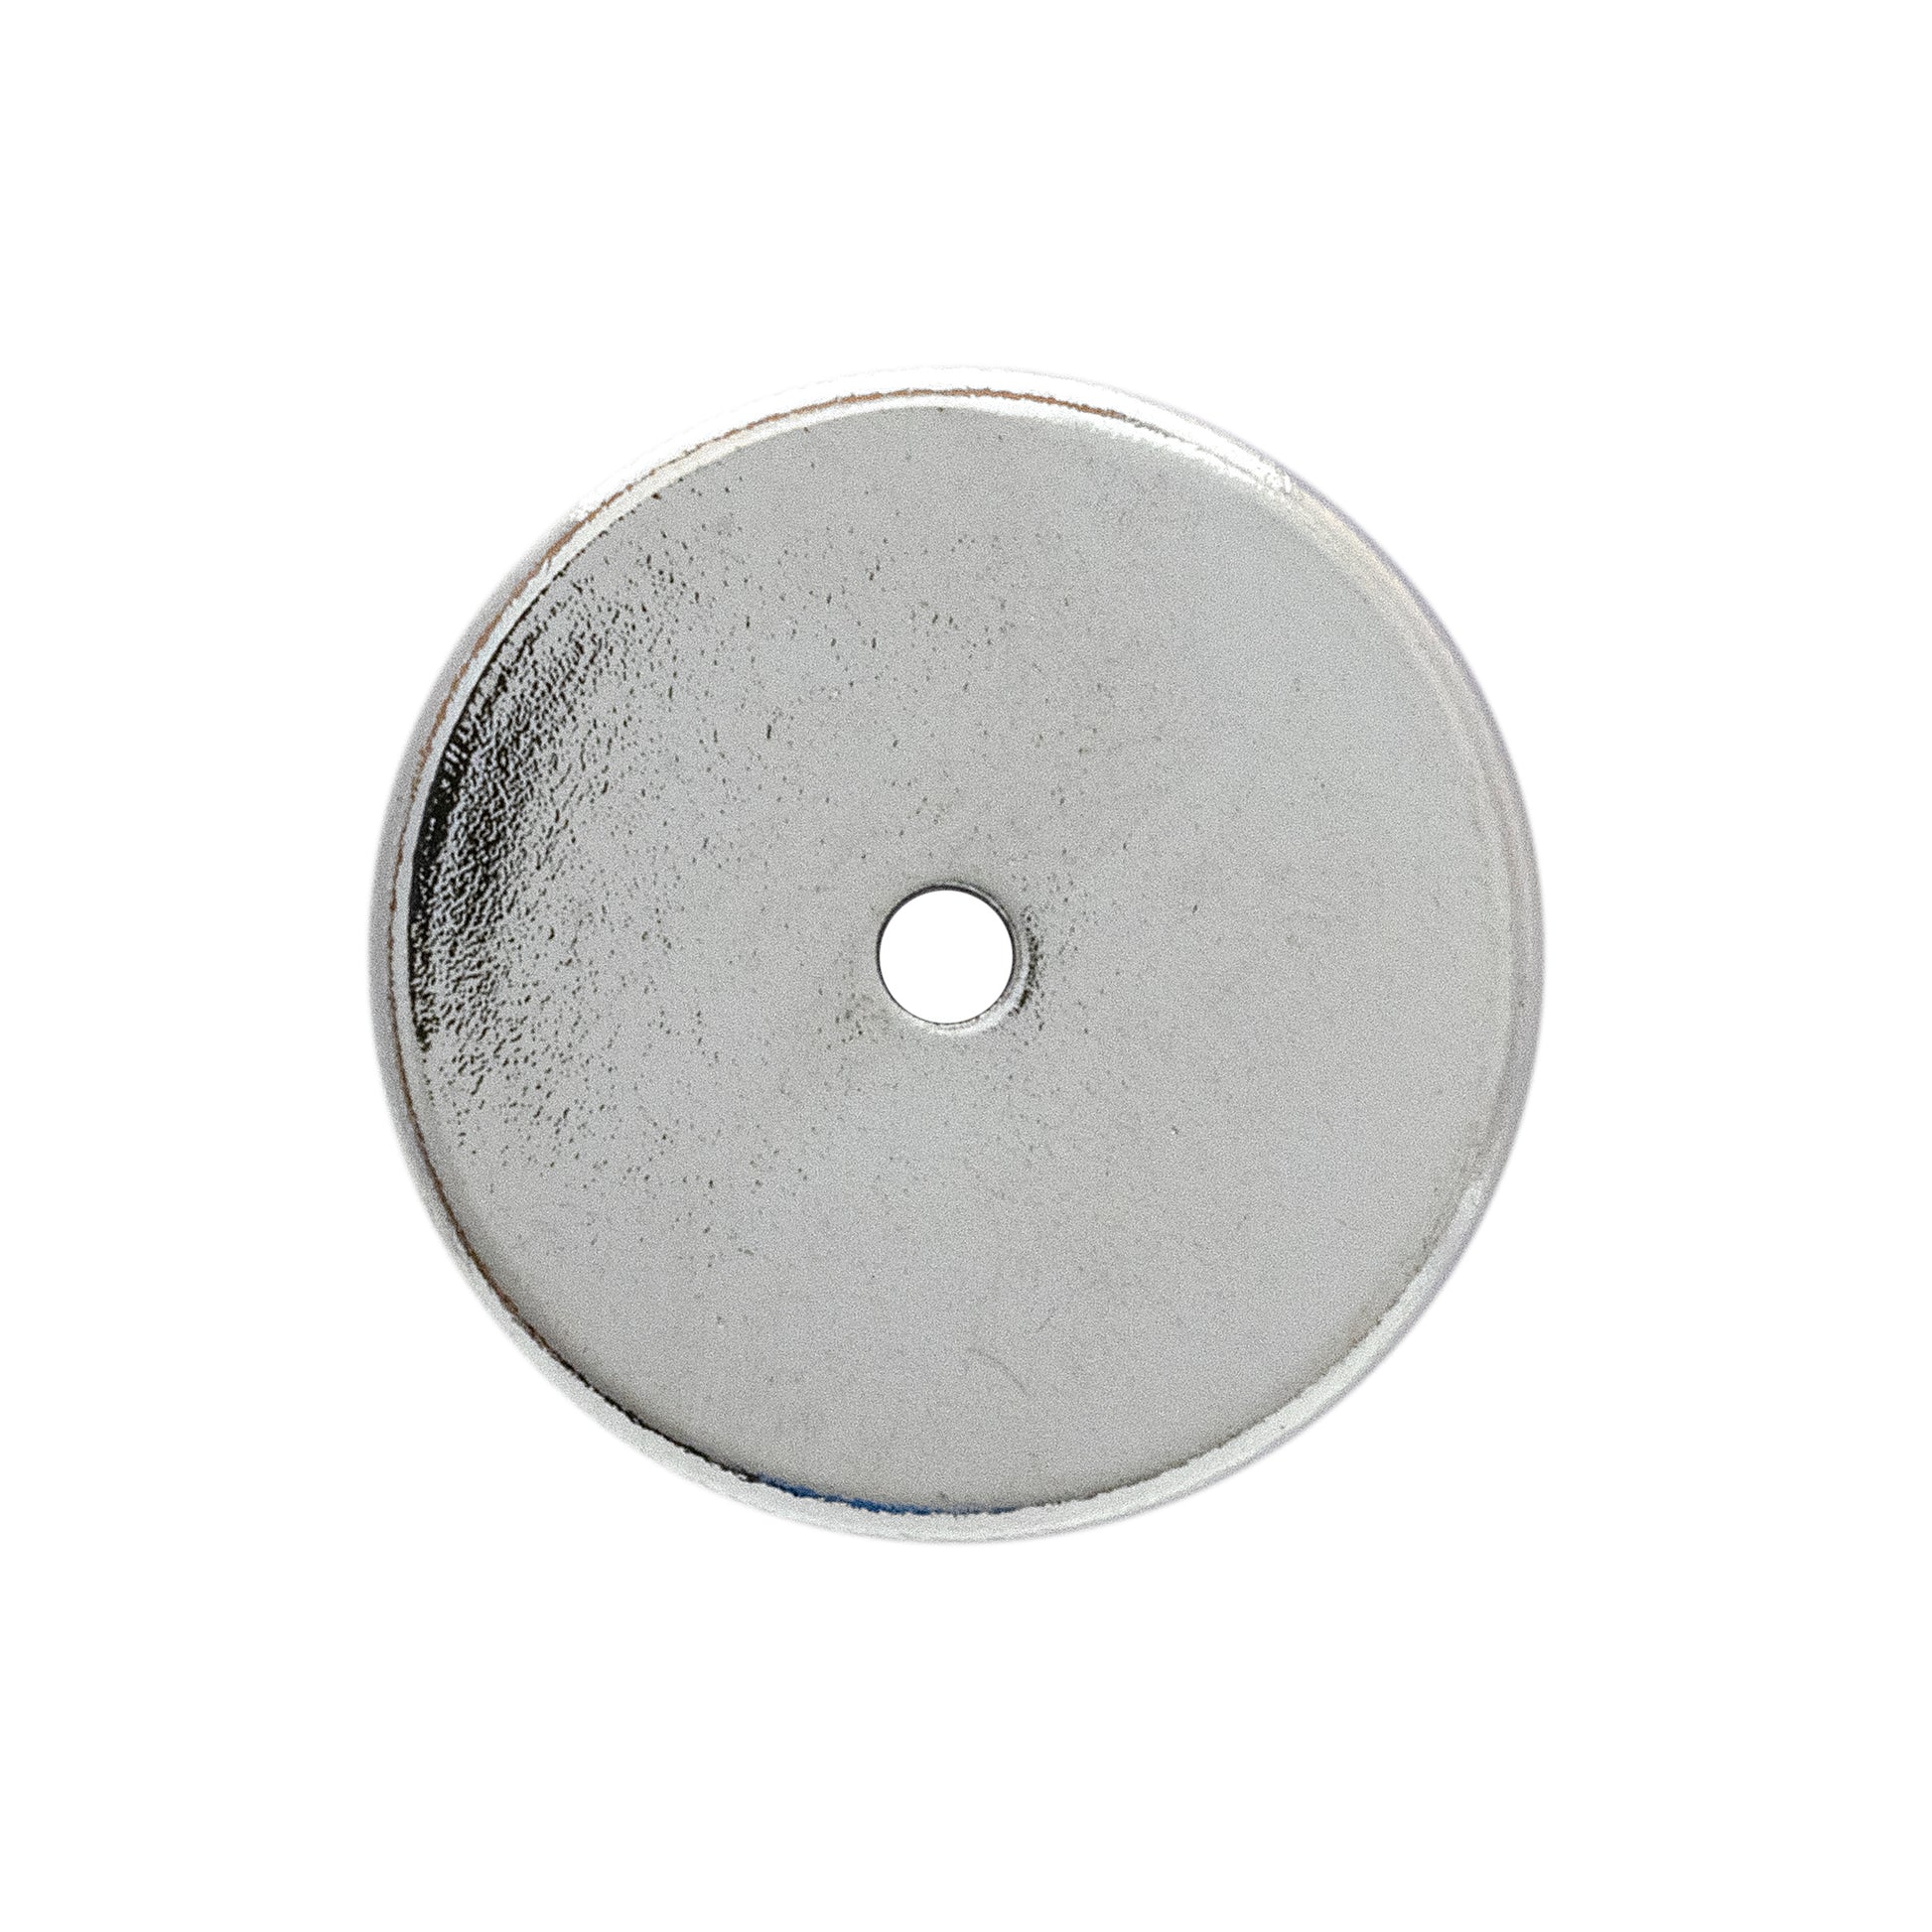 Load image into Gallery viewer, RB20N-NEOBX Neodymium Round Base Magnet - Bottom View